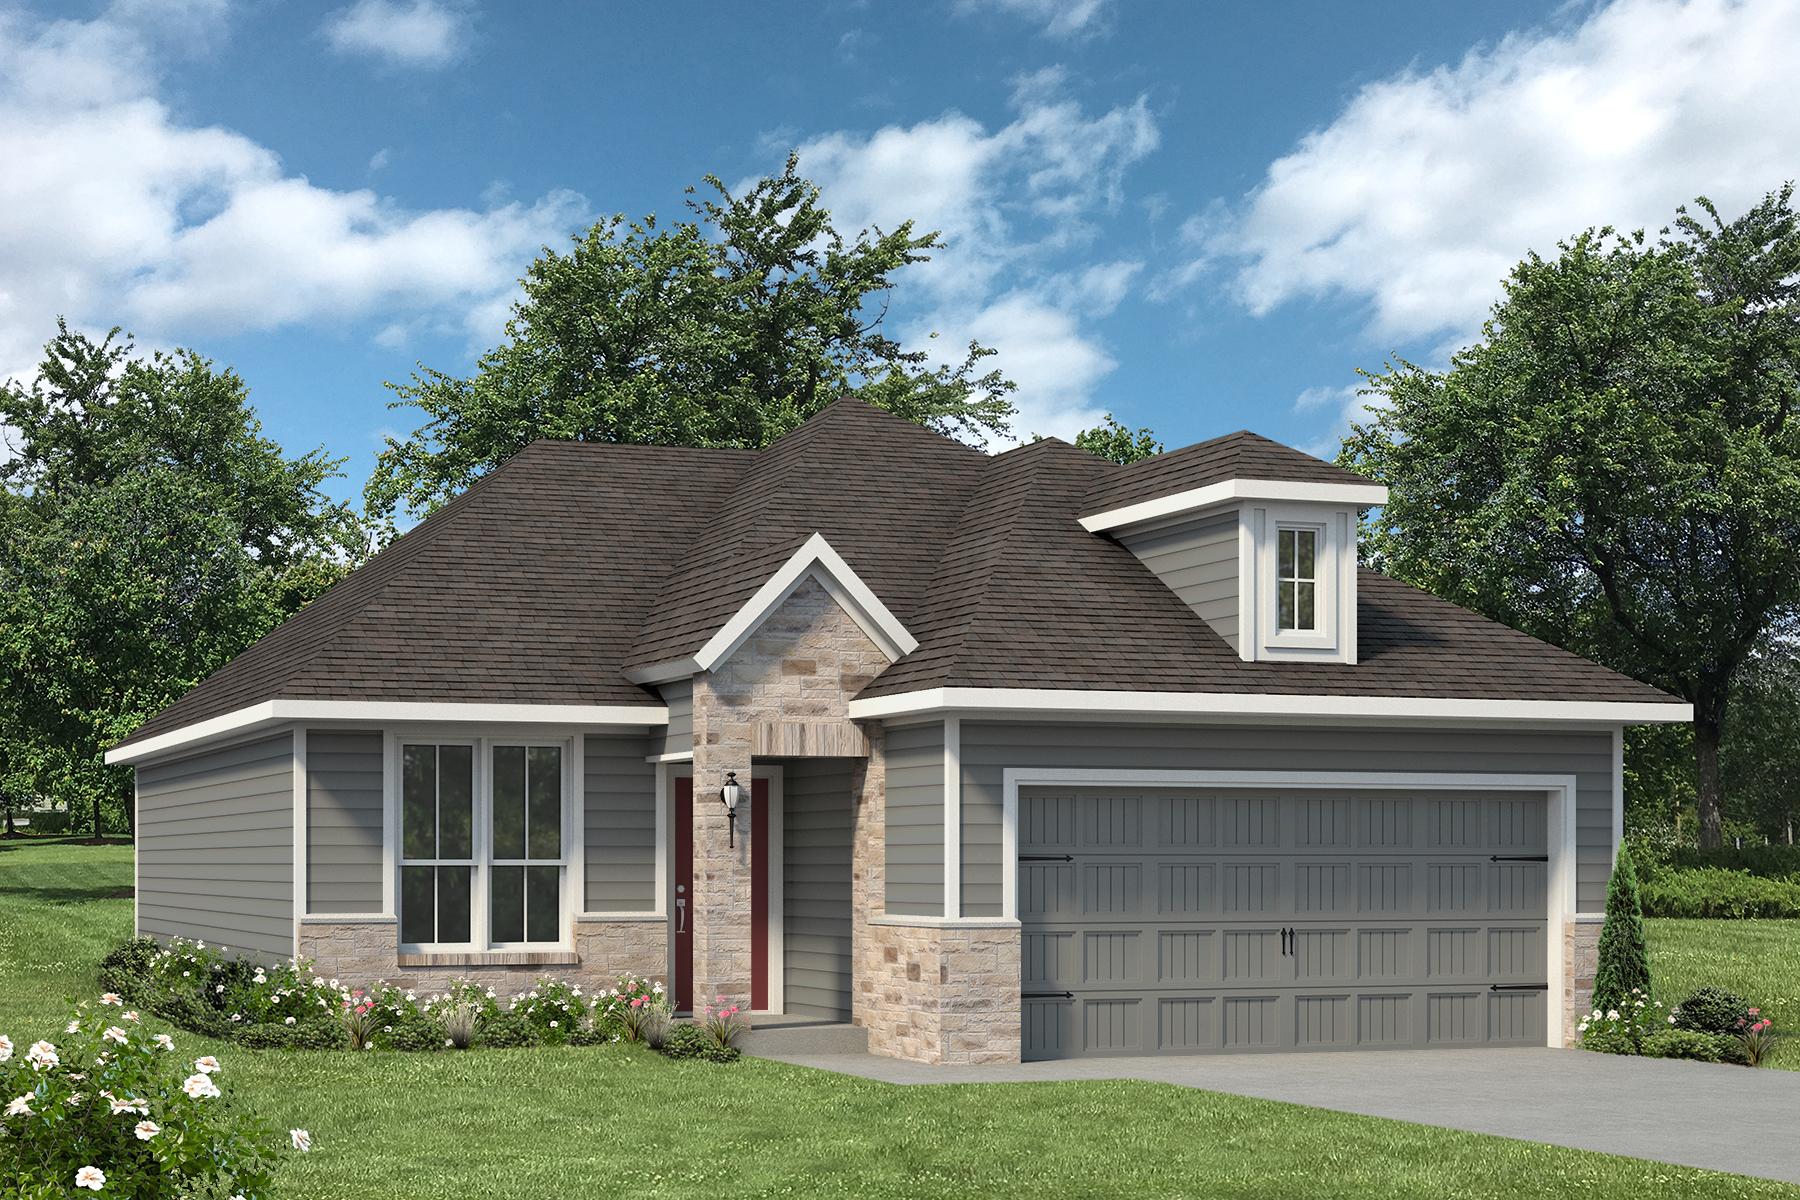 https://myhome.anewgo.com/client/stylecraft/community/Our%20Plans/plan/1363%20%7C%20Miller%20Classic?elevId=14. The 1363 New Home Floor Plan